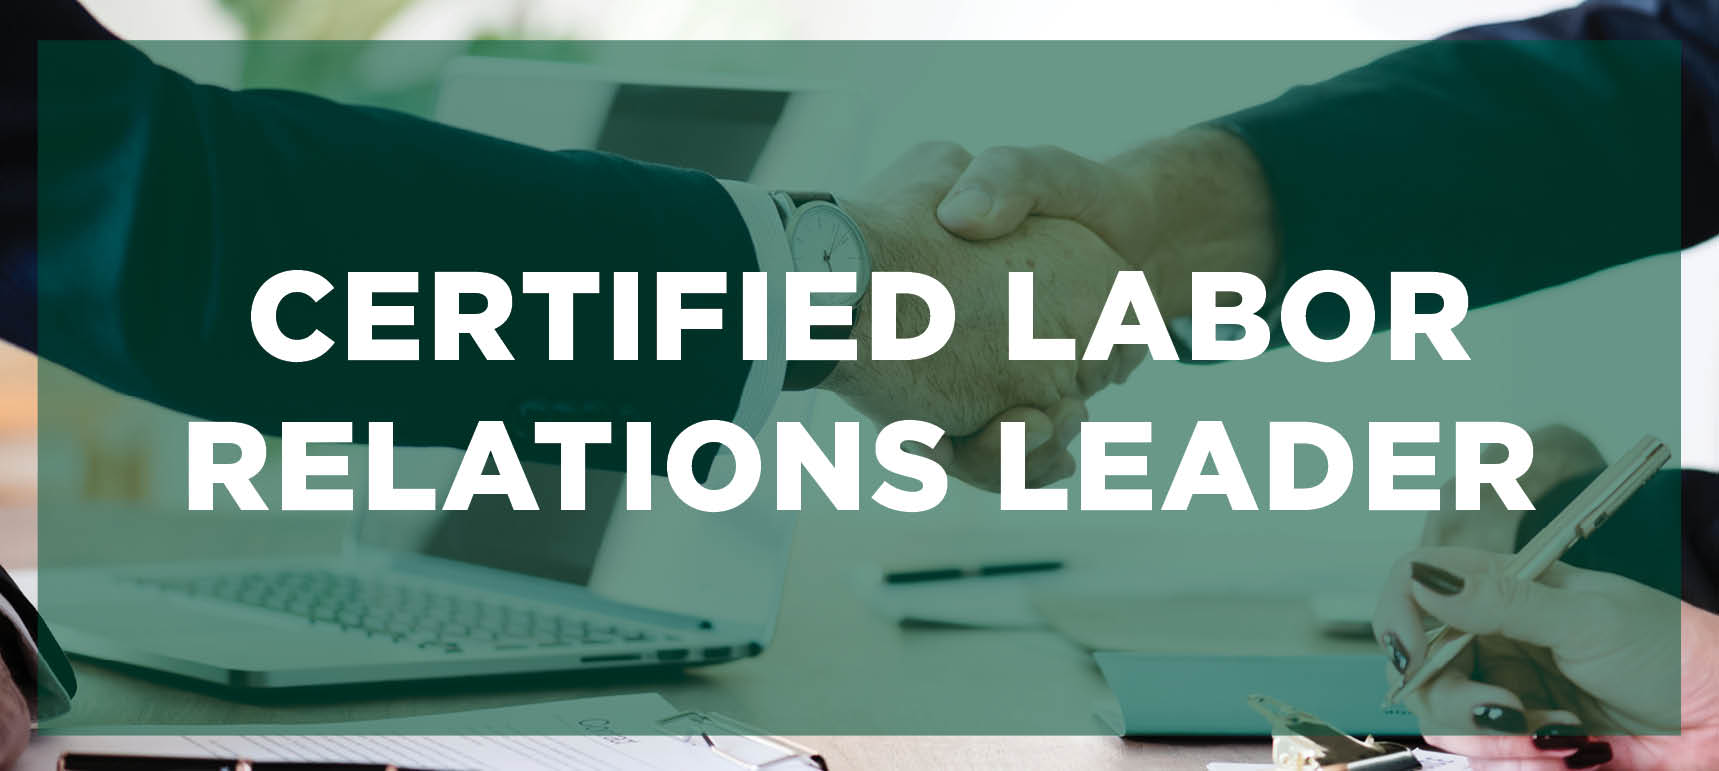 Certified Labor Relations Leader